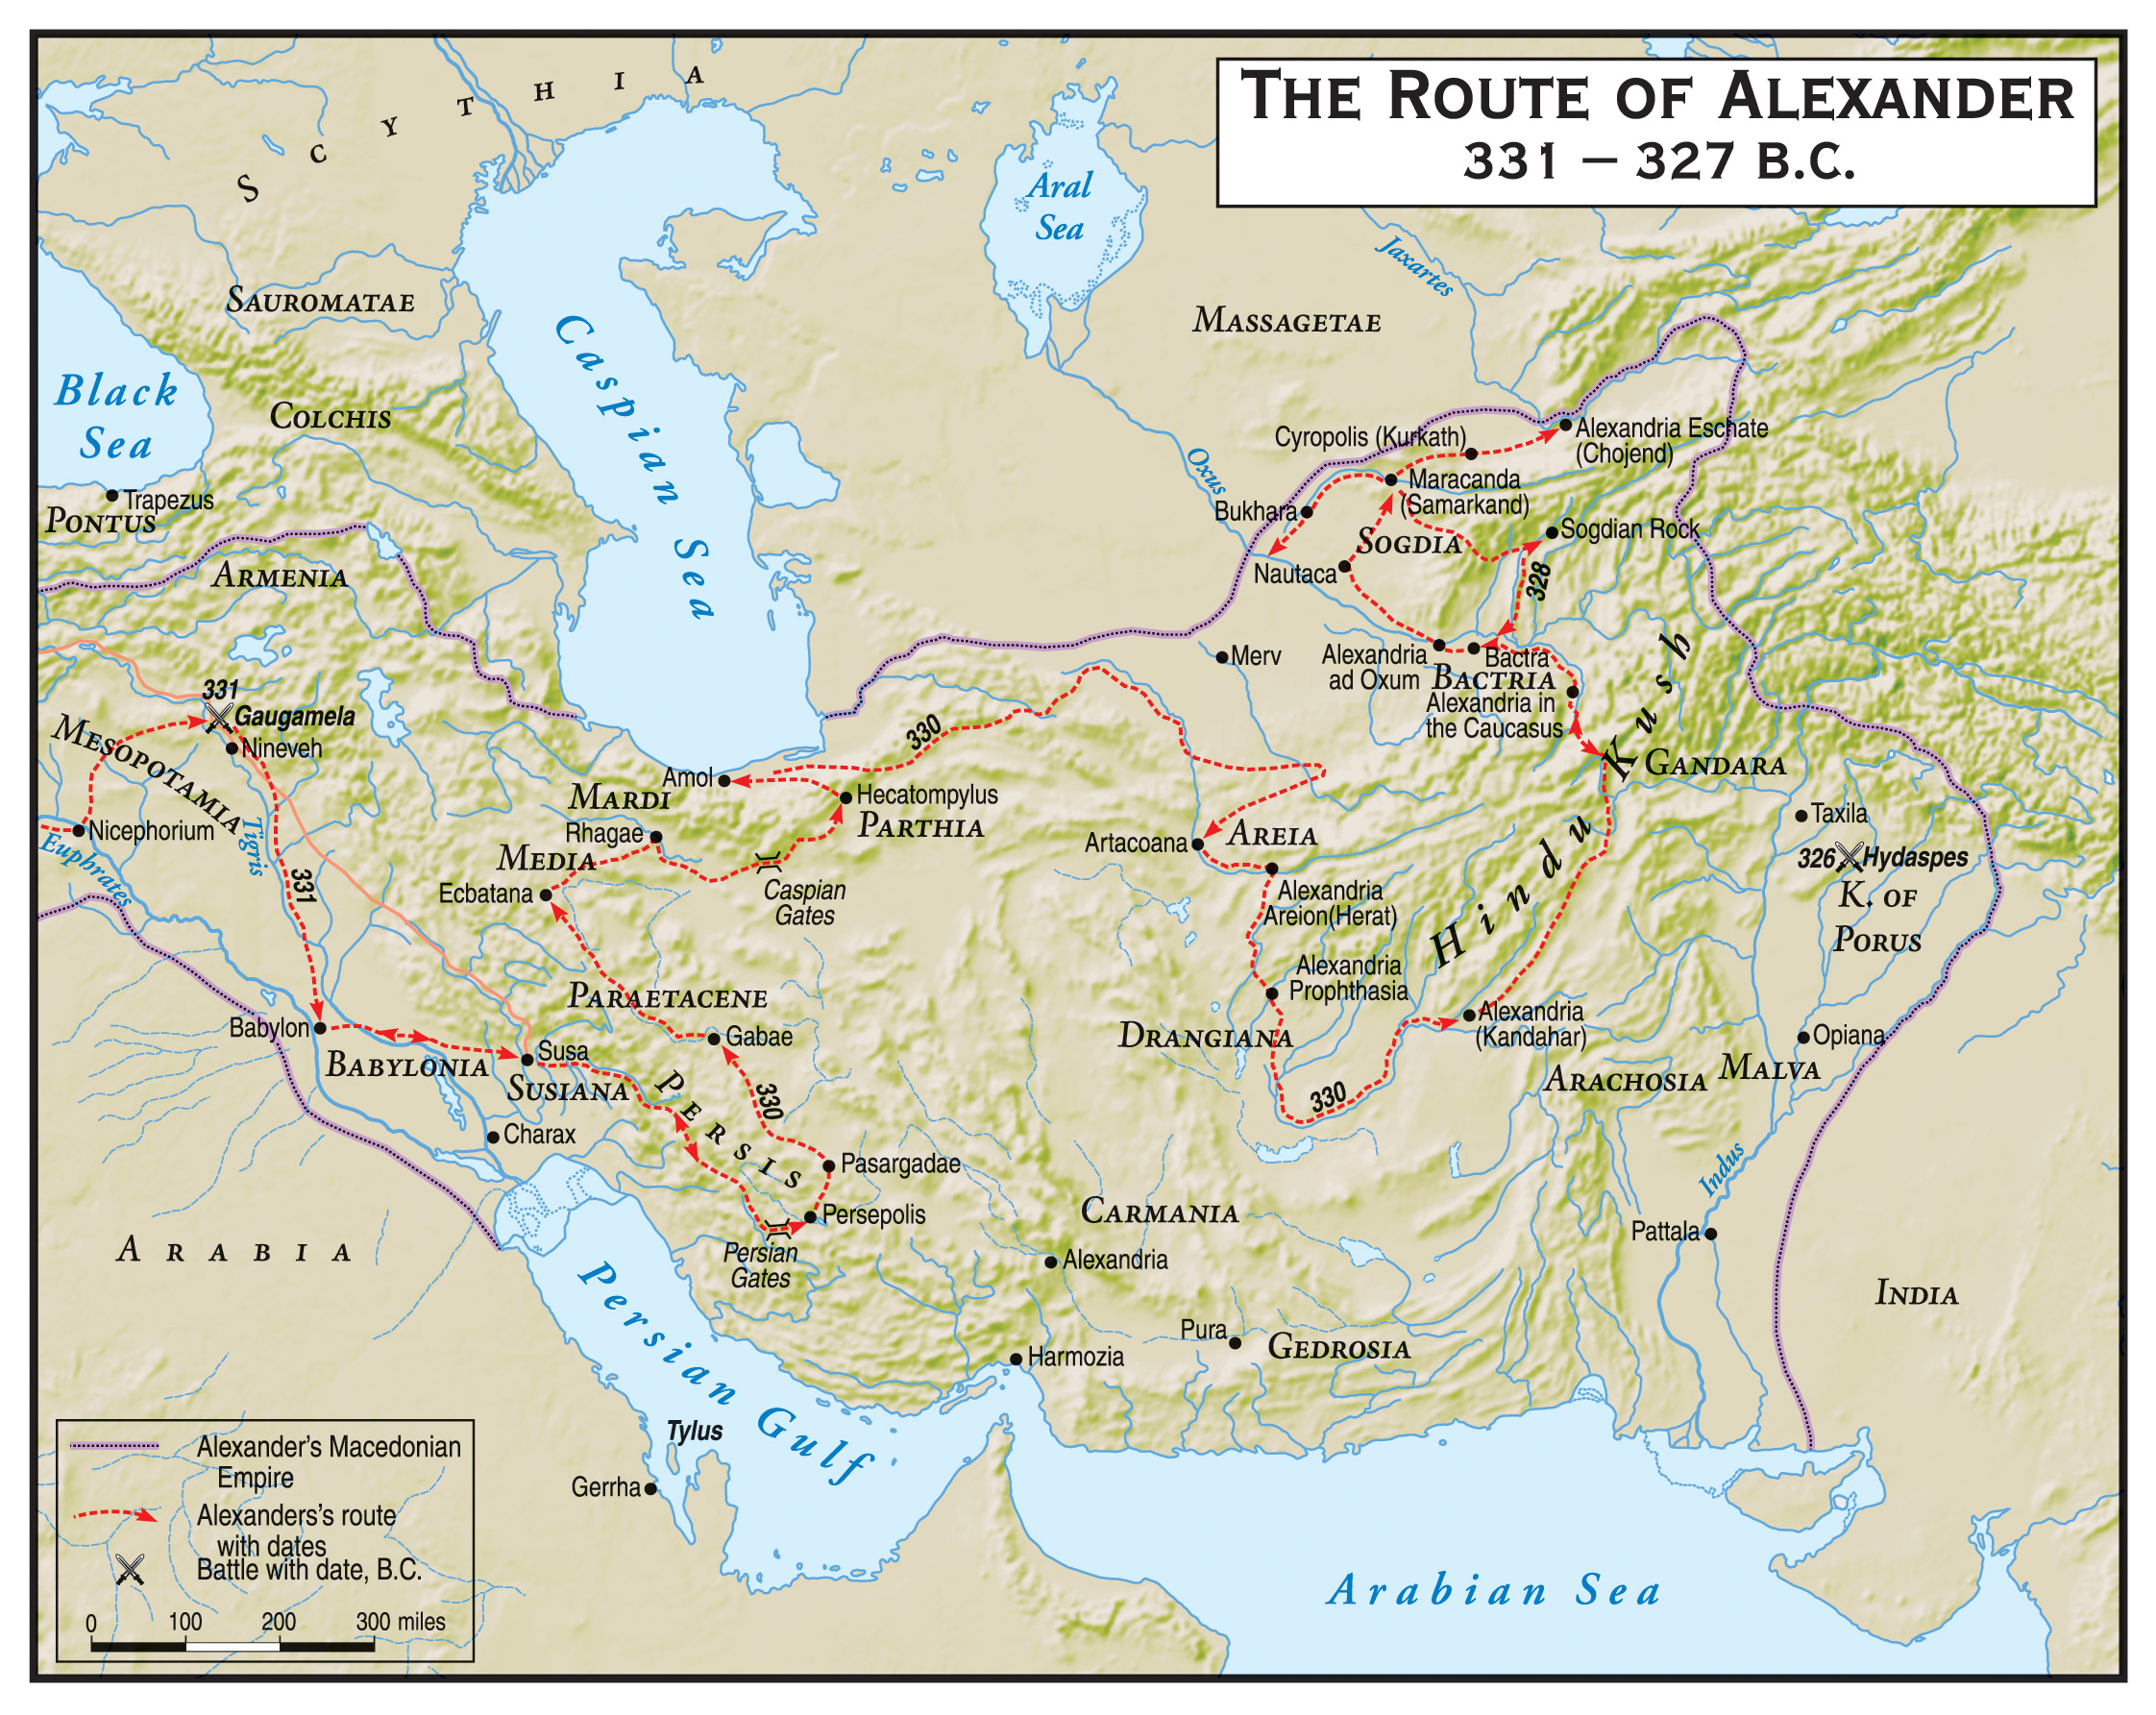 Before reaching India, Alexander spent years in the region of modern Afghanistan. The work there wearied both men and ruler.